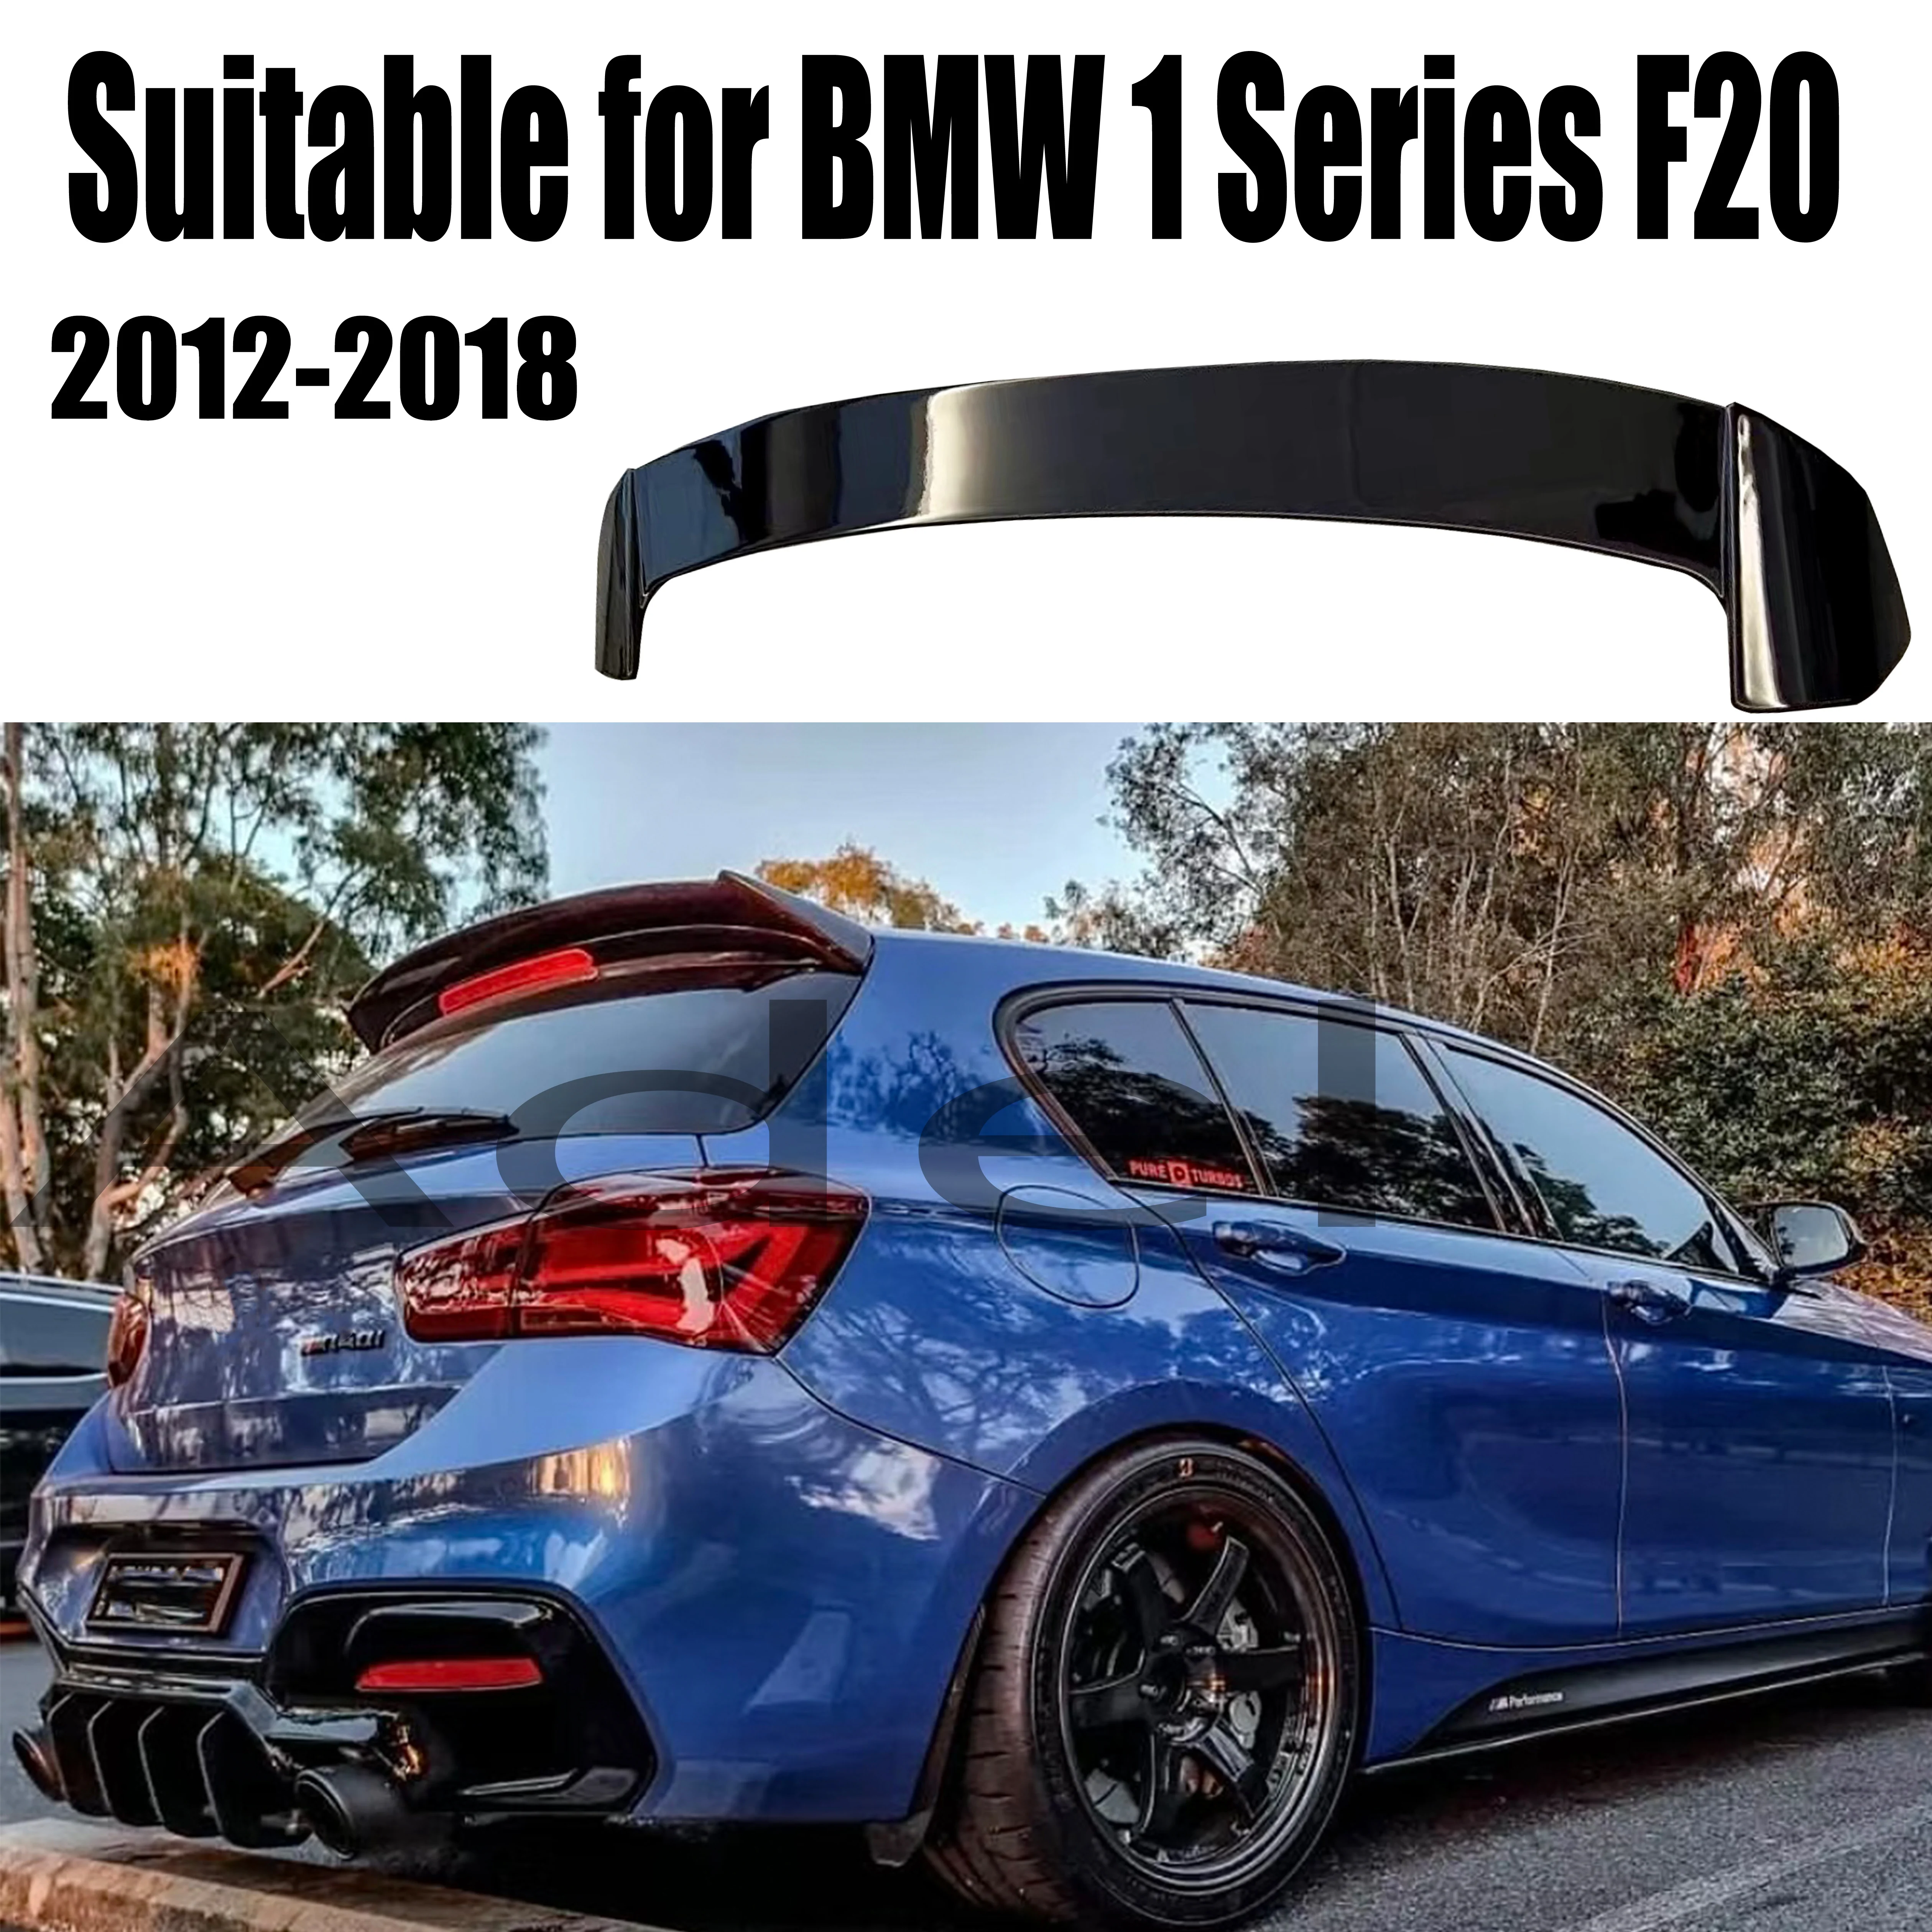 

For BMW 1 Series F20 Roof Hatchback Spoiler 2012-2018 120i 125i 118im 135i 116i Car Tail Wing Decoration ABS Material Spoiler